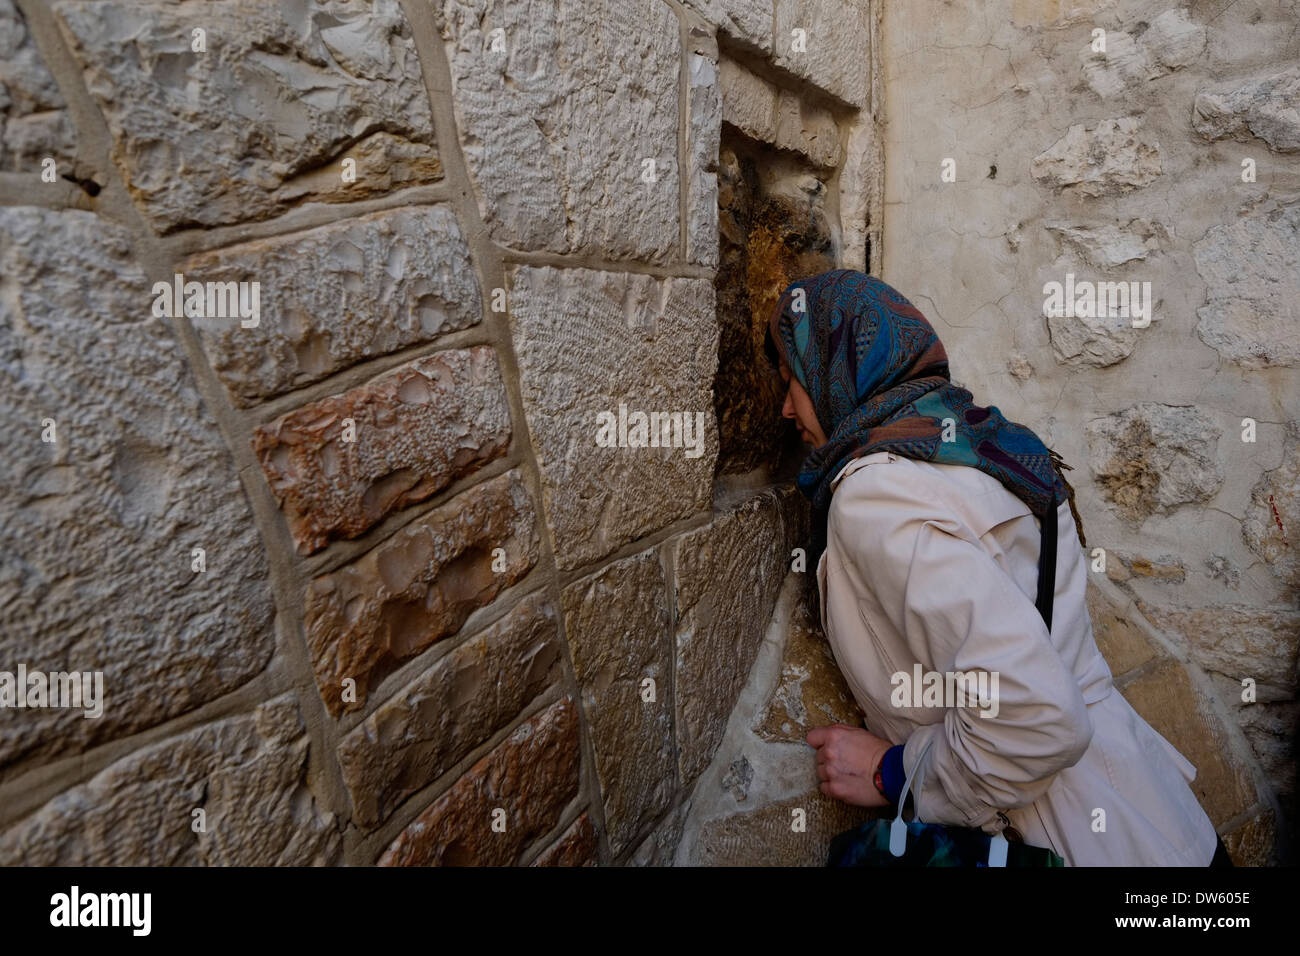 An Eastern Orthodox Christian prays as she puts her palm on a square stone believed to be imprint of Jesus hand on the sunken part of the exterior wall of the Chapel of Simon of Cyrene, at the 5th station of the cross in Via Dolorosa street old city East Jerusalem Israel Stock Photo